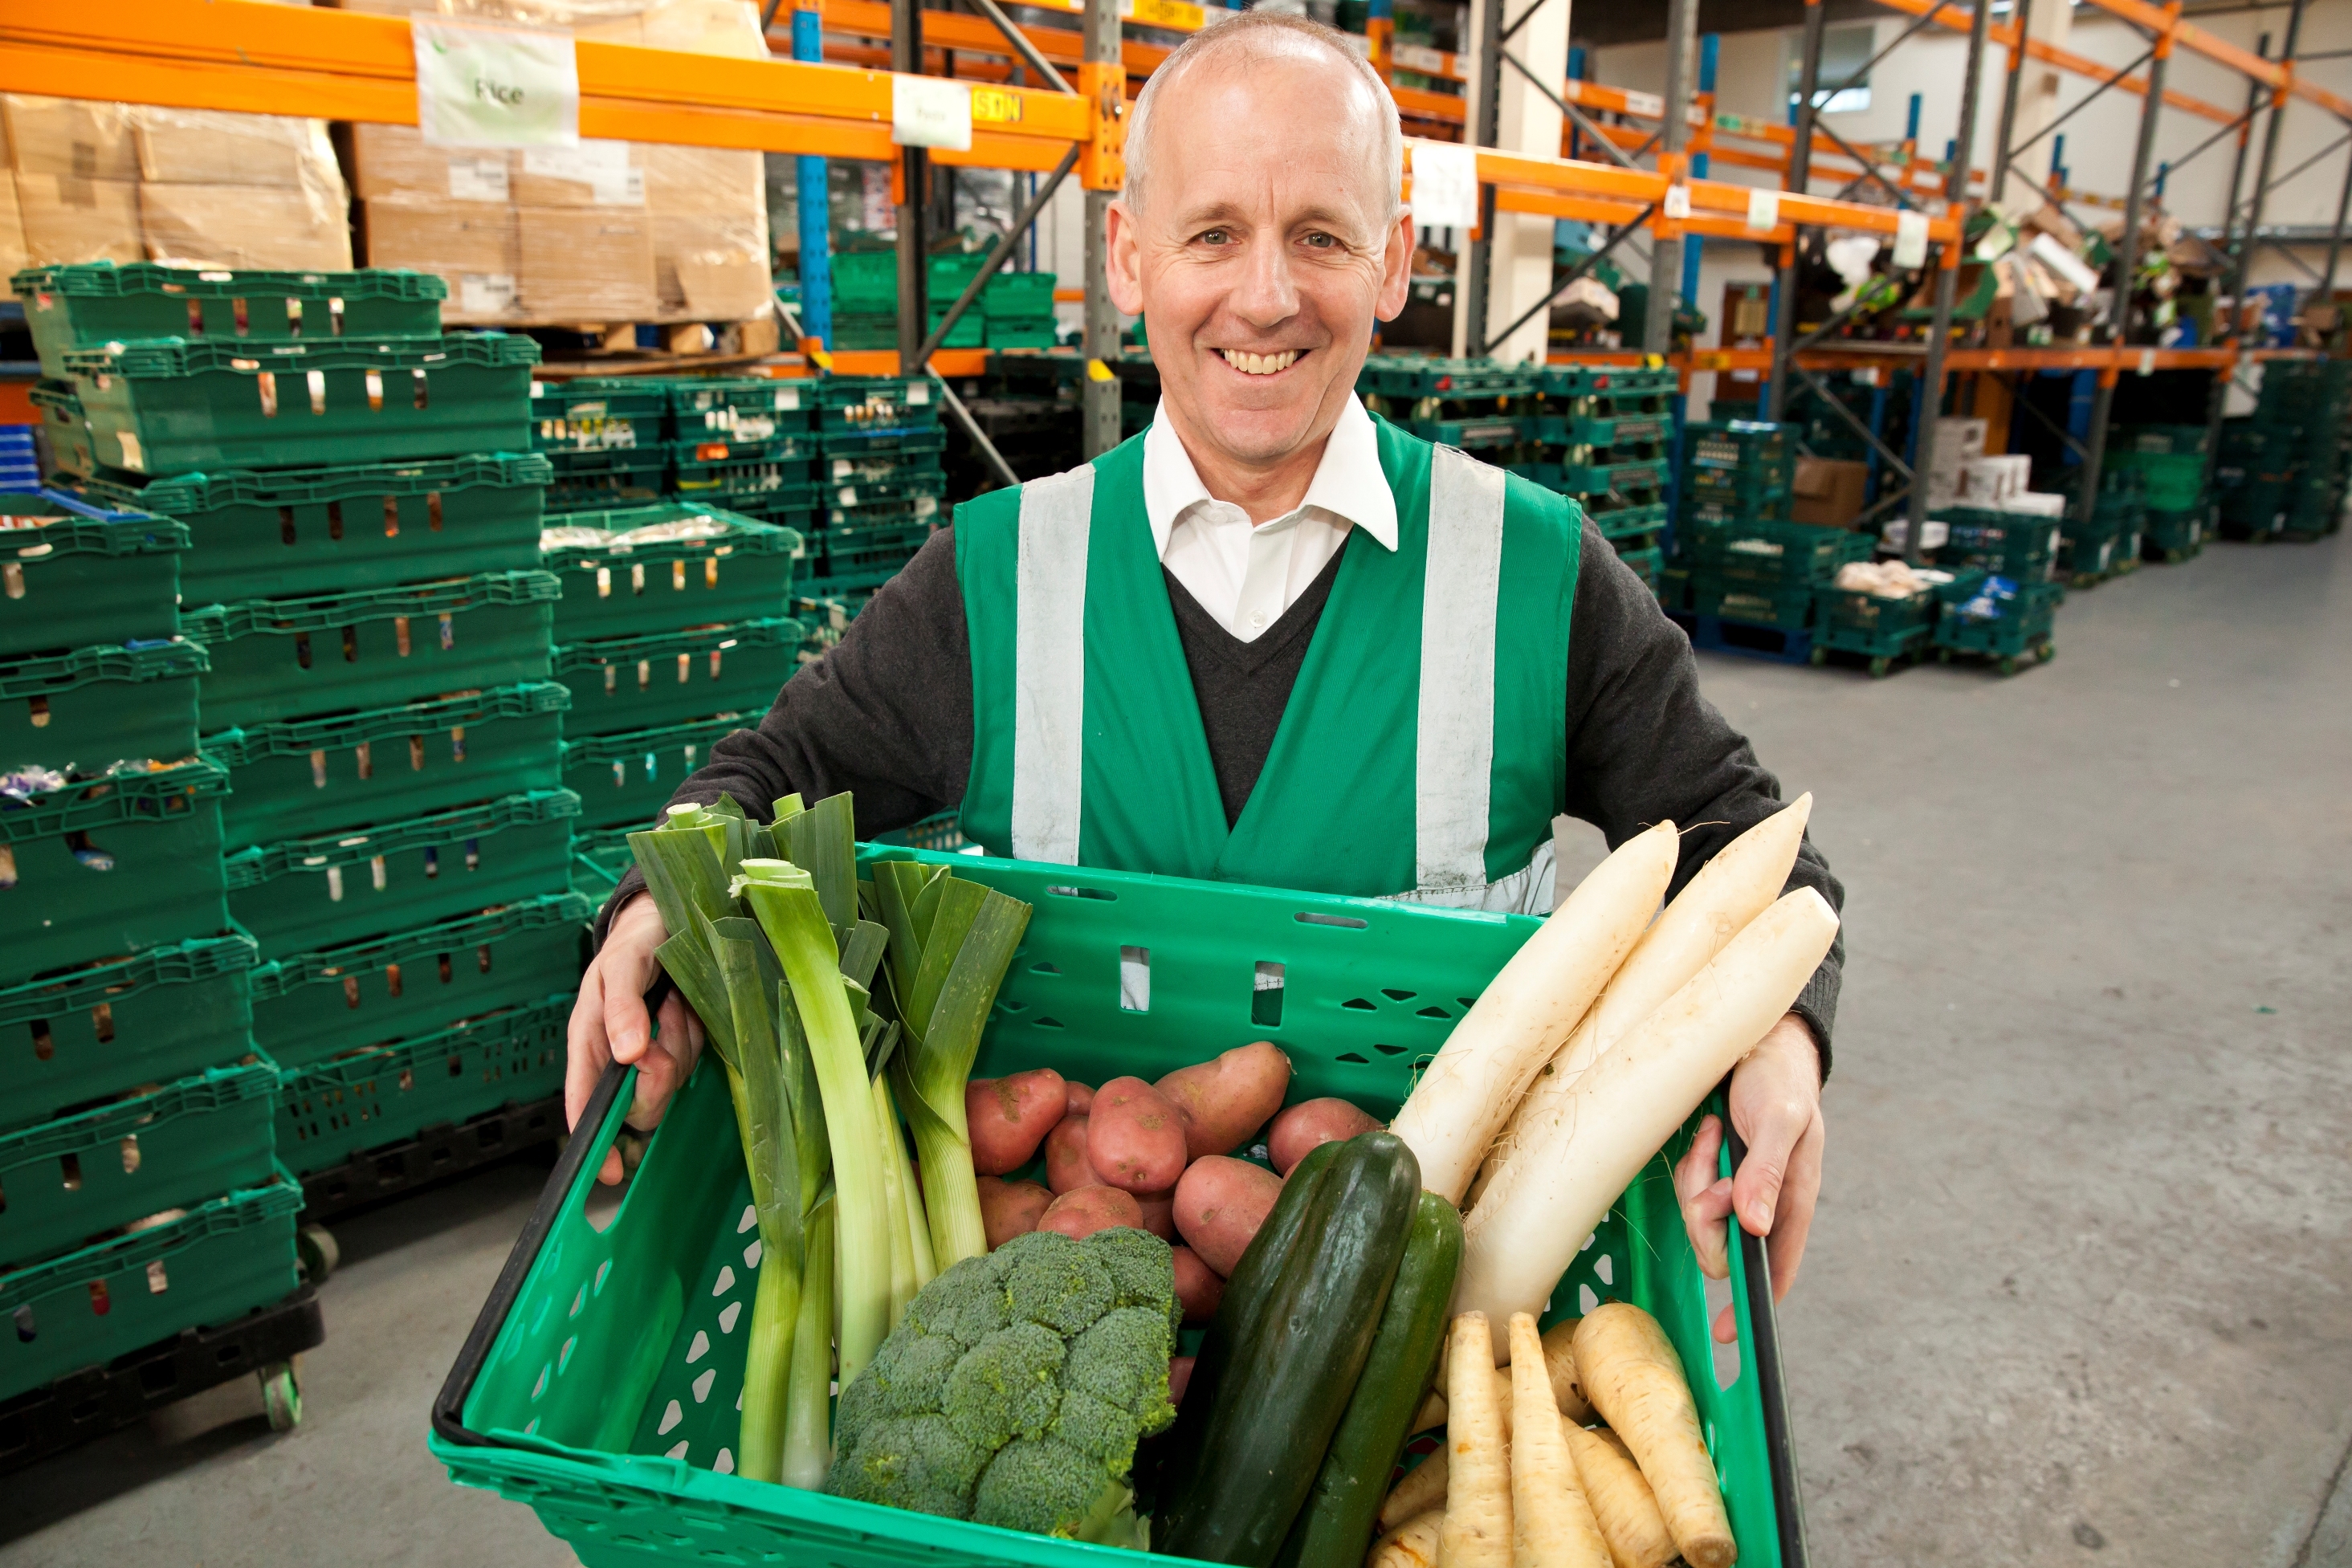 FareShare CEO Lindsay Boswell.